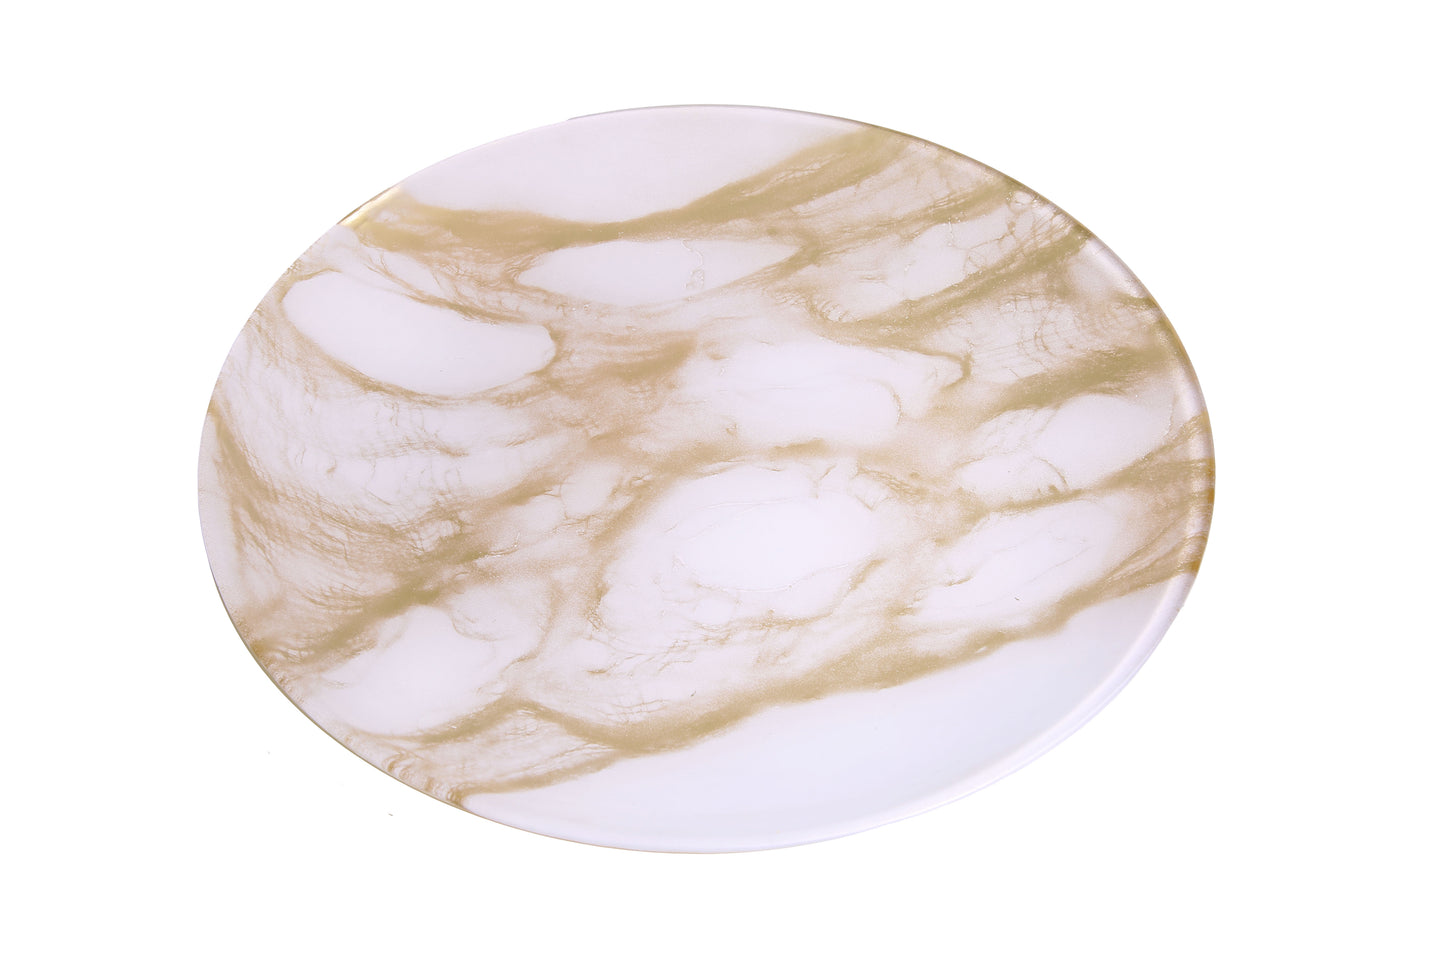 Set Of 4 Gold-White Marble Chargers - 12.75